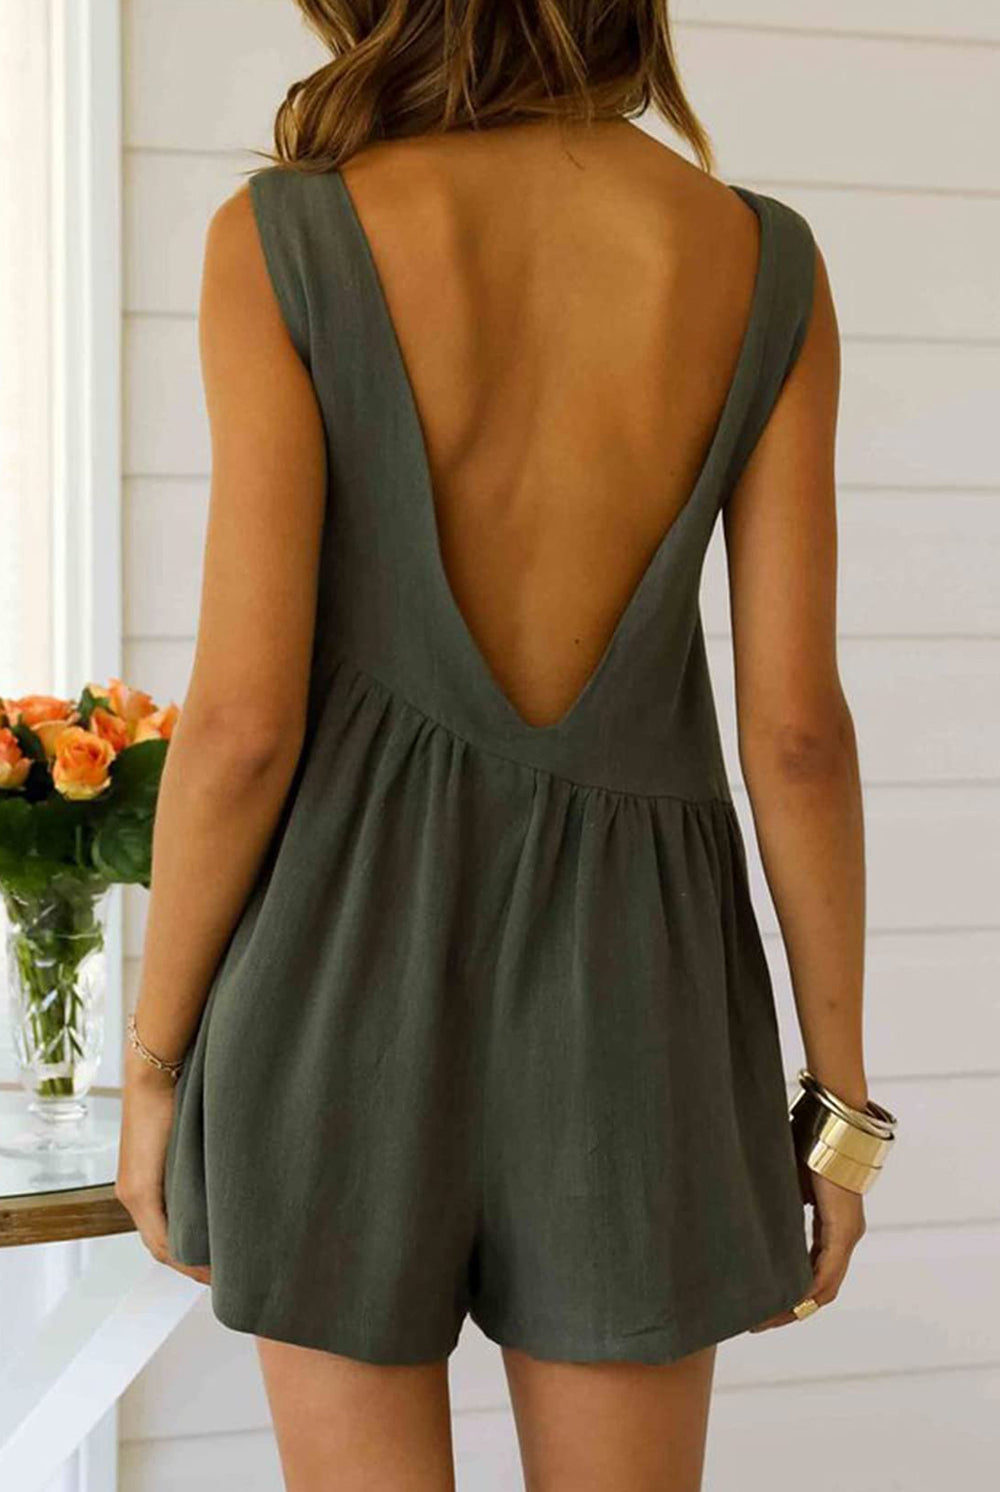 Stylish woman in a Chic Olive Backless Romper, exuding confidence and summer-ready vibes with a flattering and breezy silhouette.